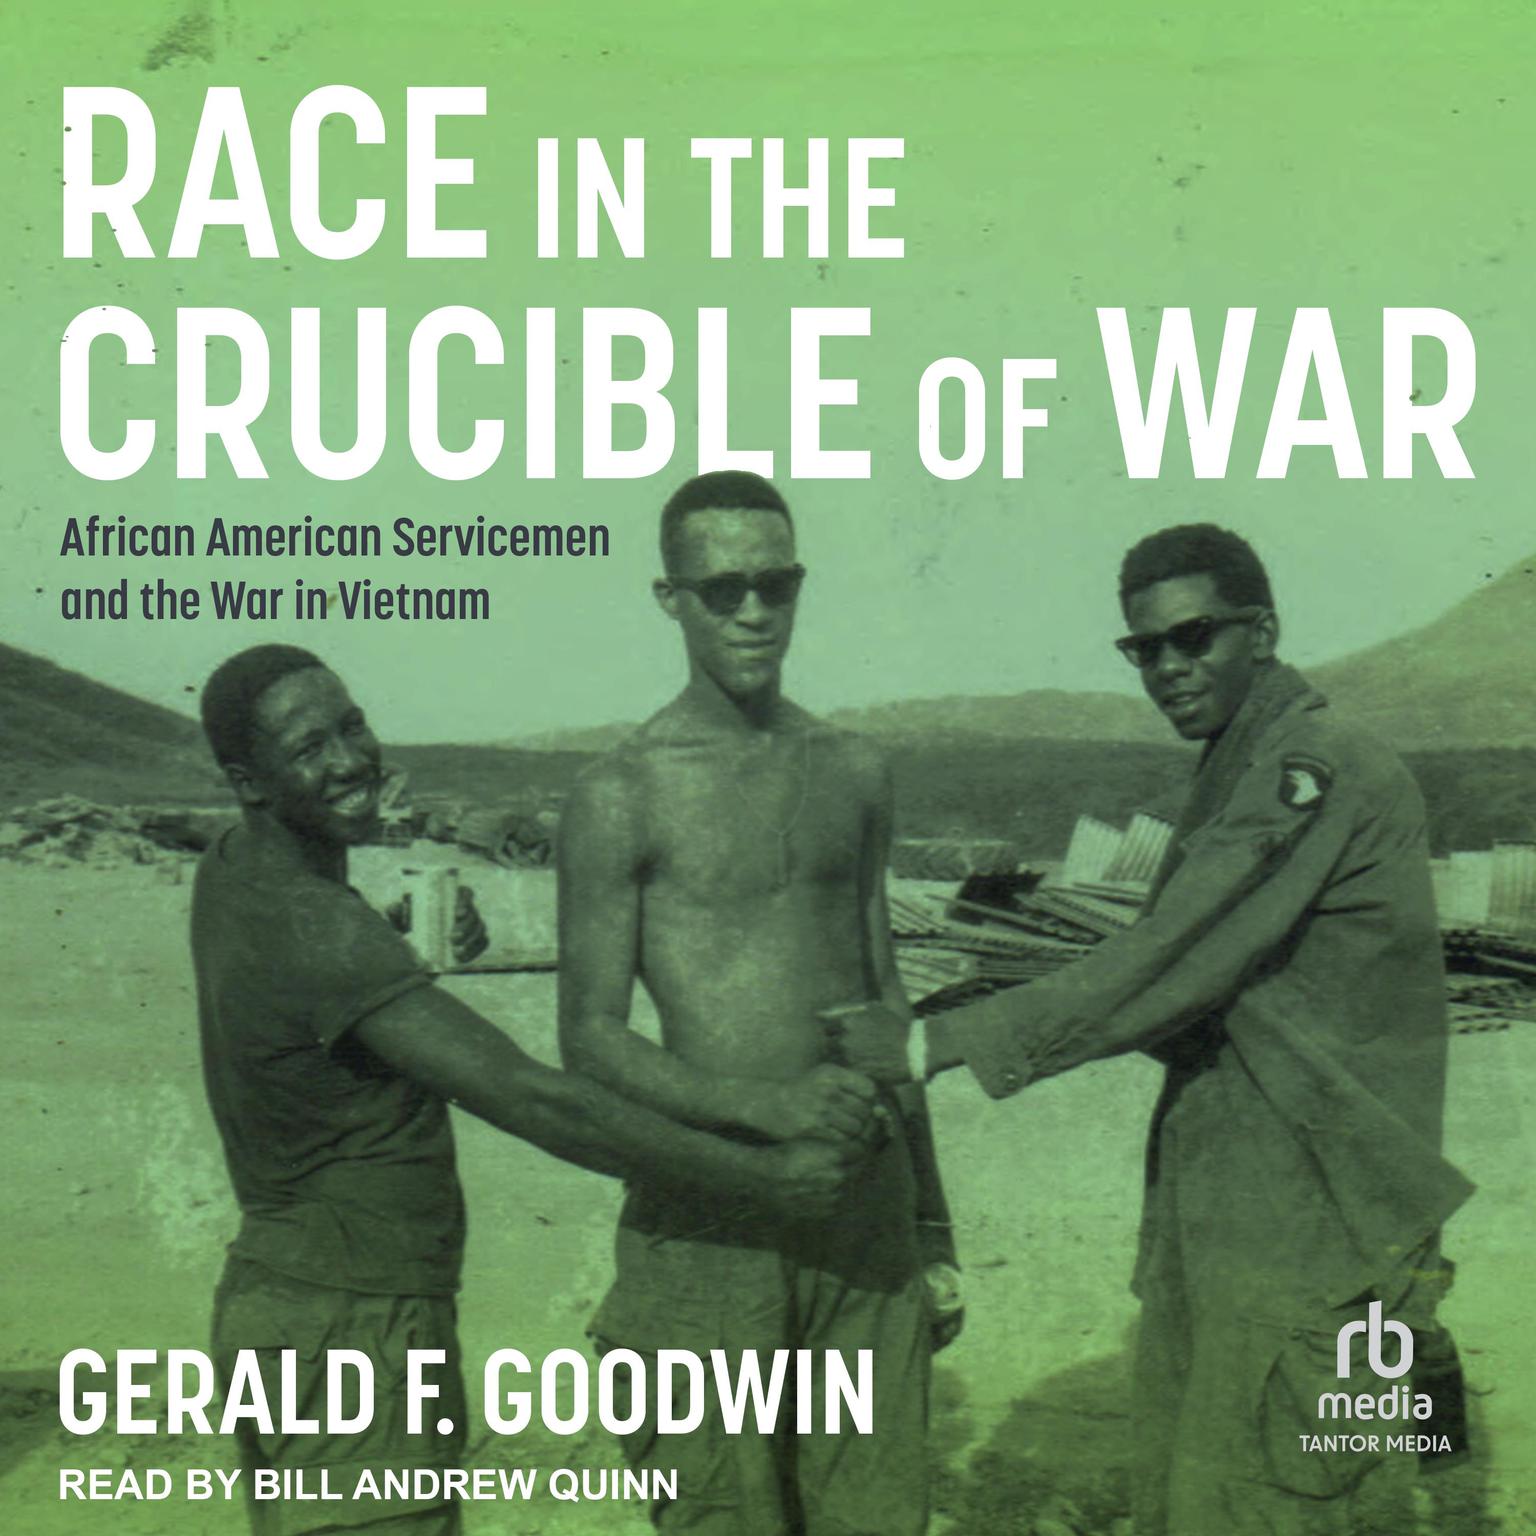 Race in the Crucible of War: African American Servicemen and the War in Vietnam Audiobook, by Gerald F. Goodwin